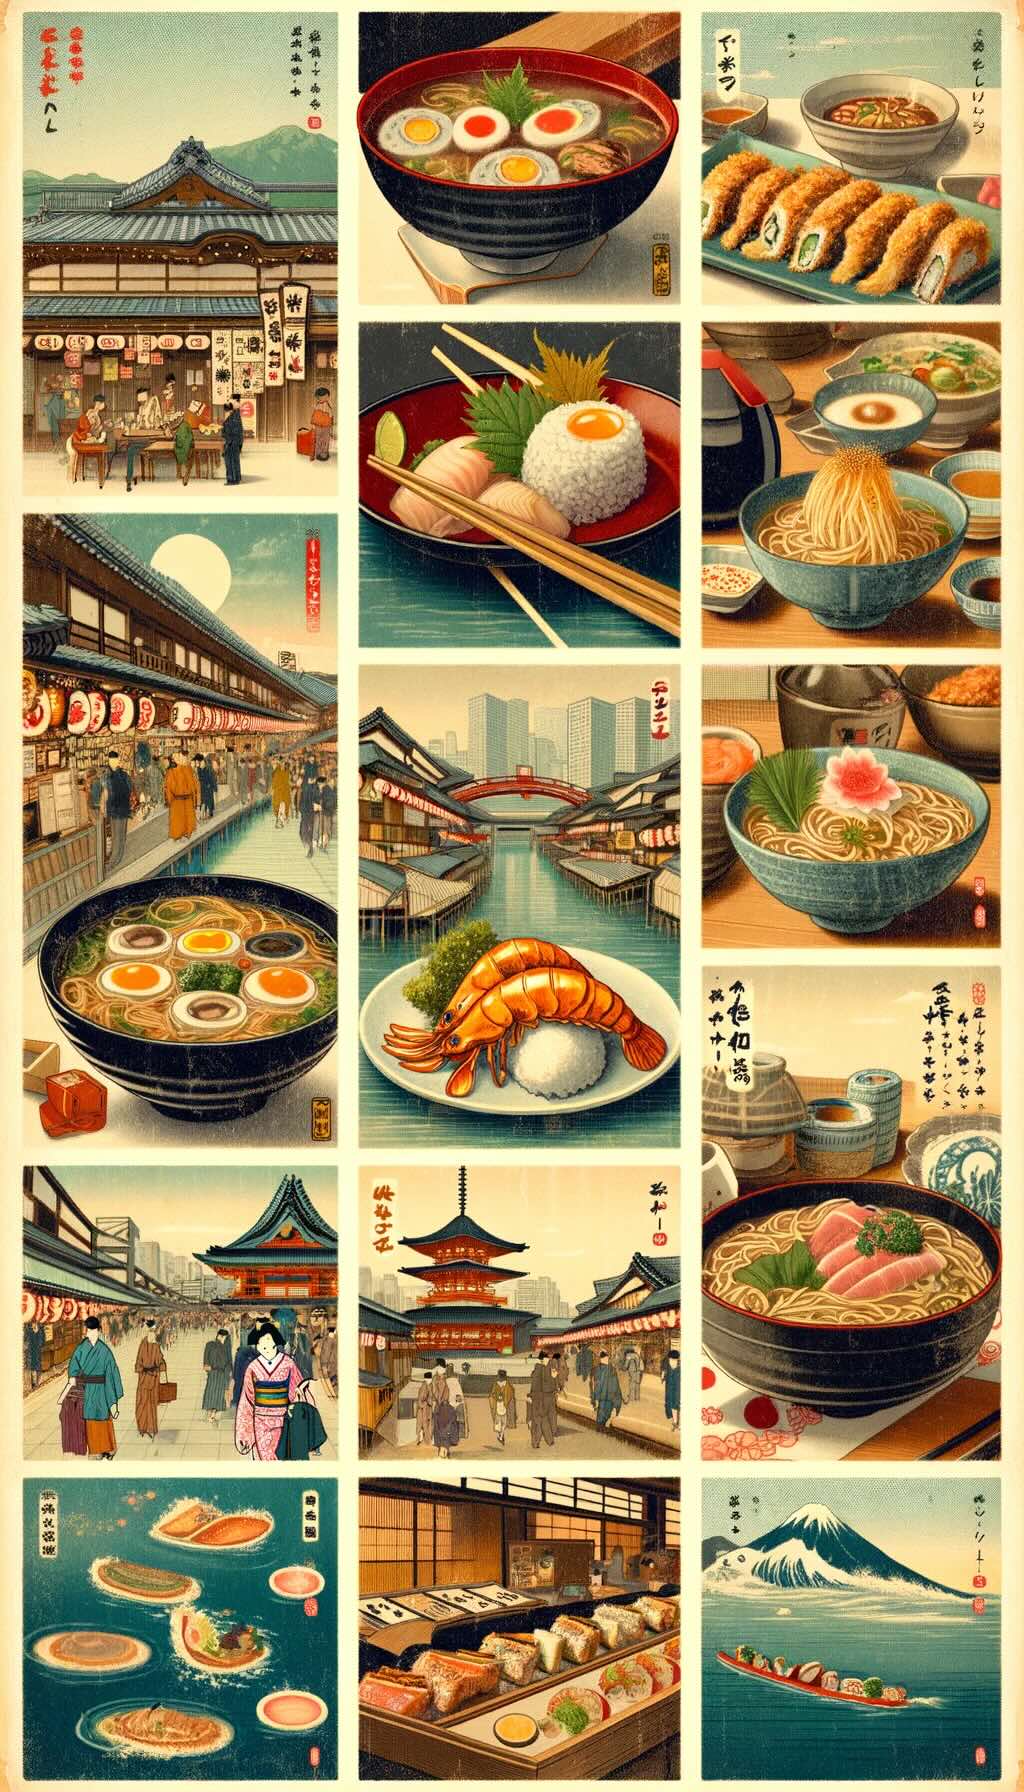 Must-try Japanese dishes and their authentic settings, vividly illustrating the diverse and rich culinary heritage of Japan